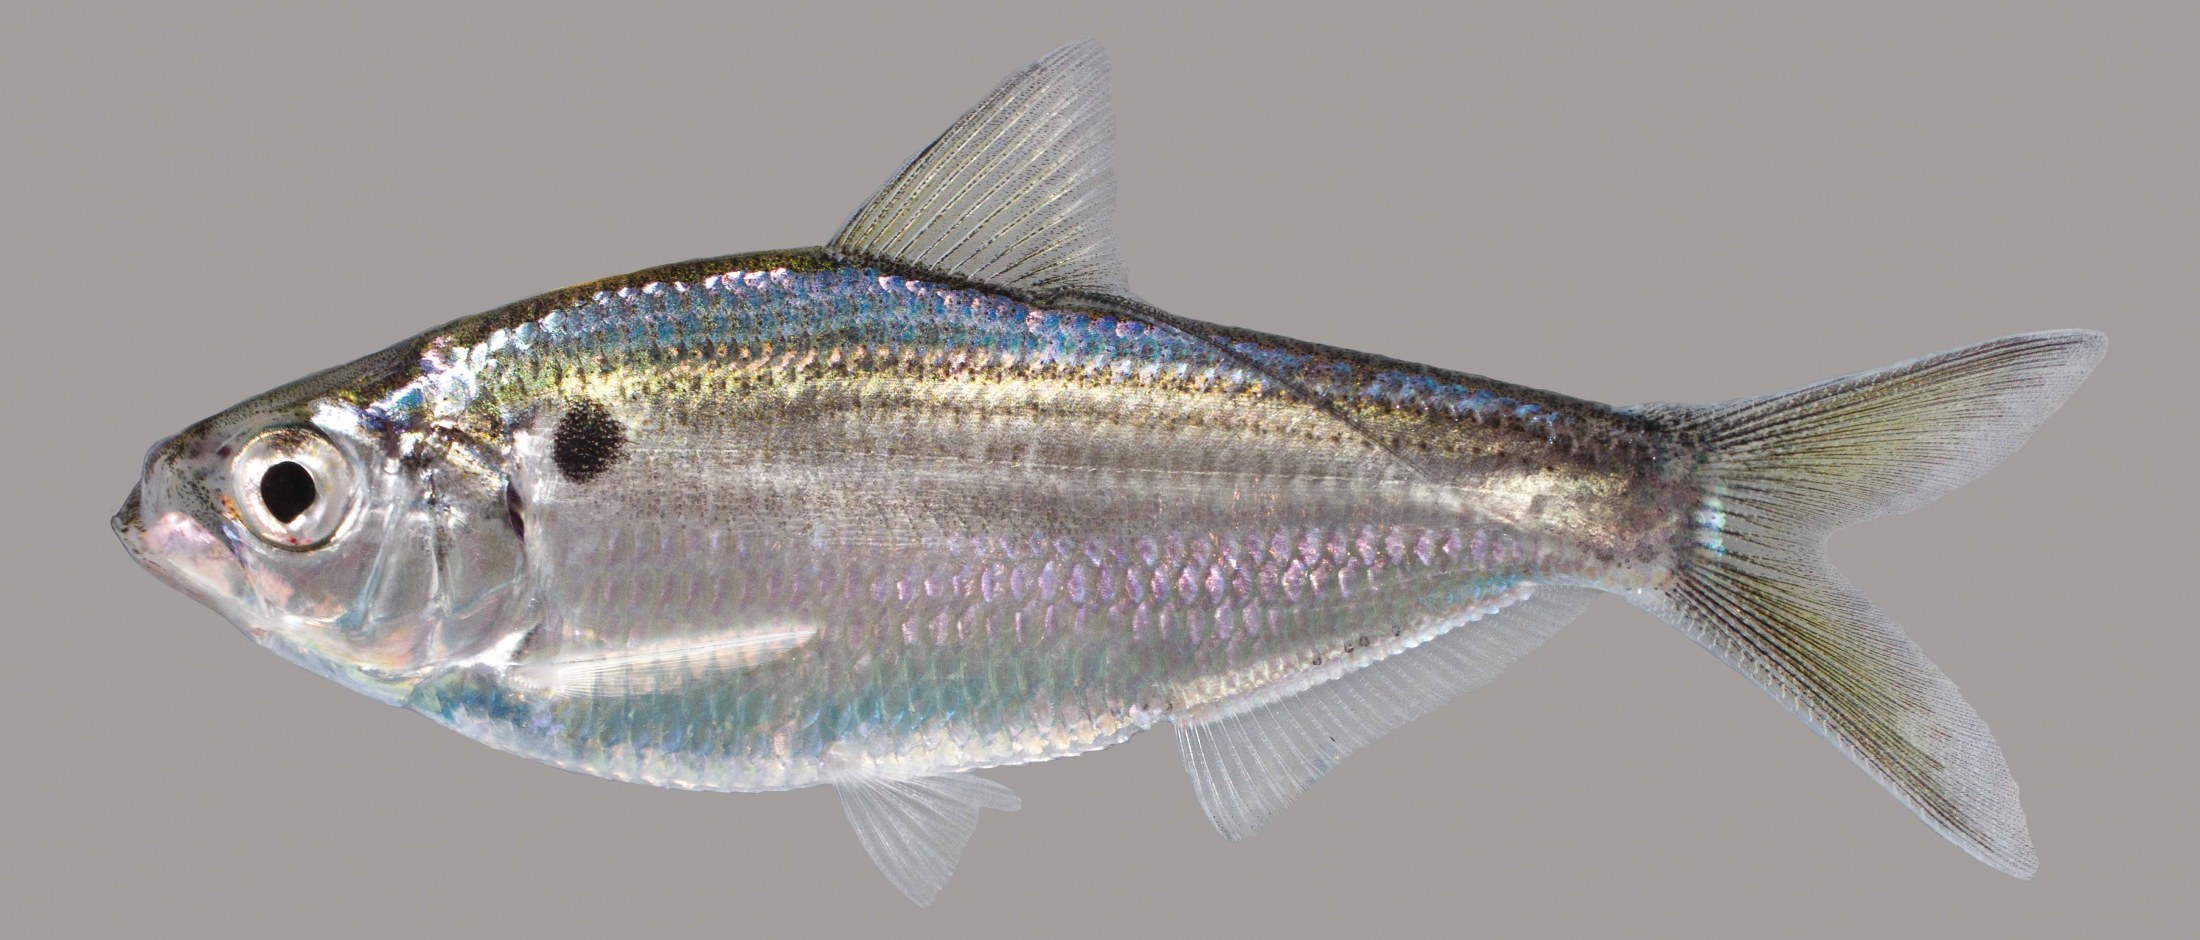 Lateral view of a threadfin shad